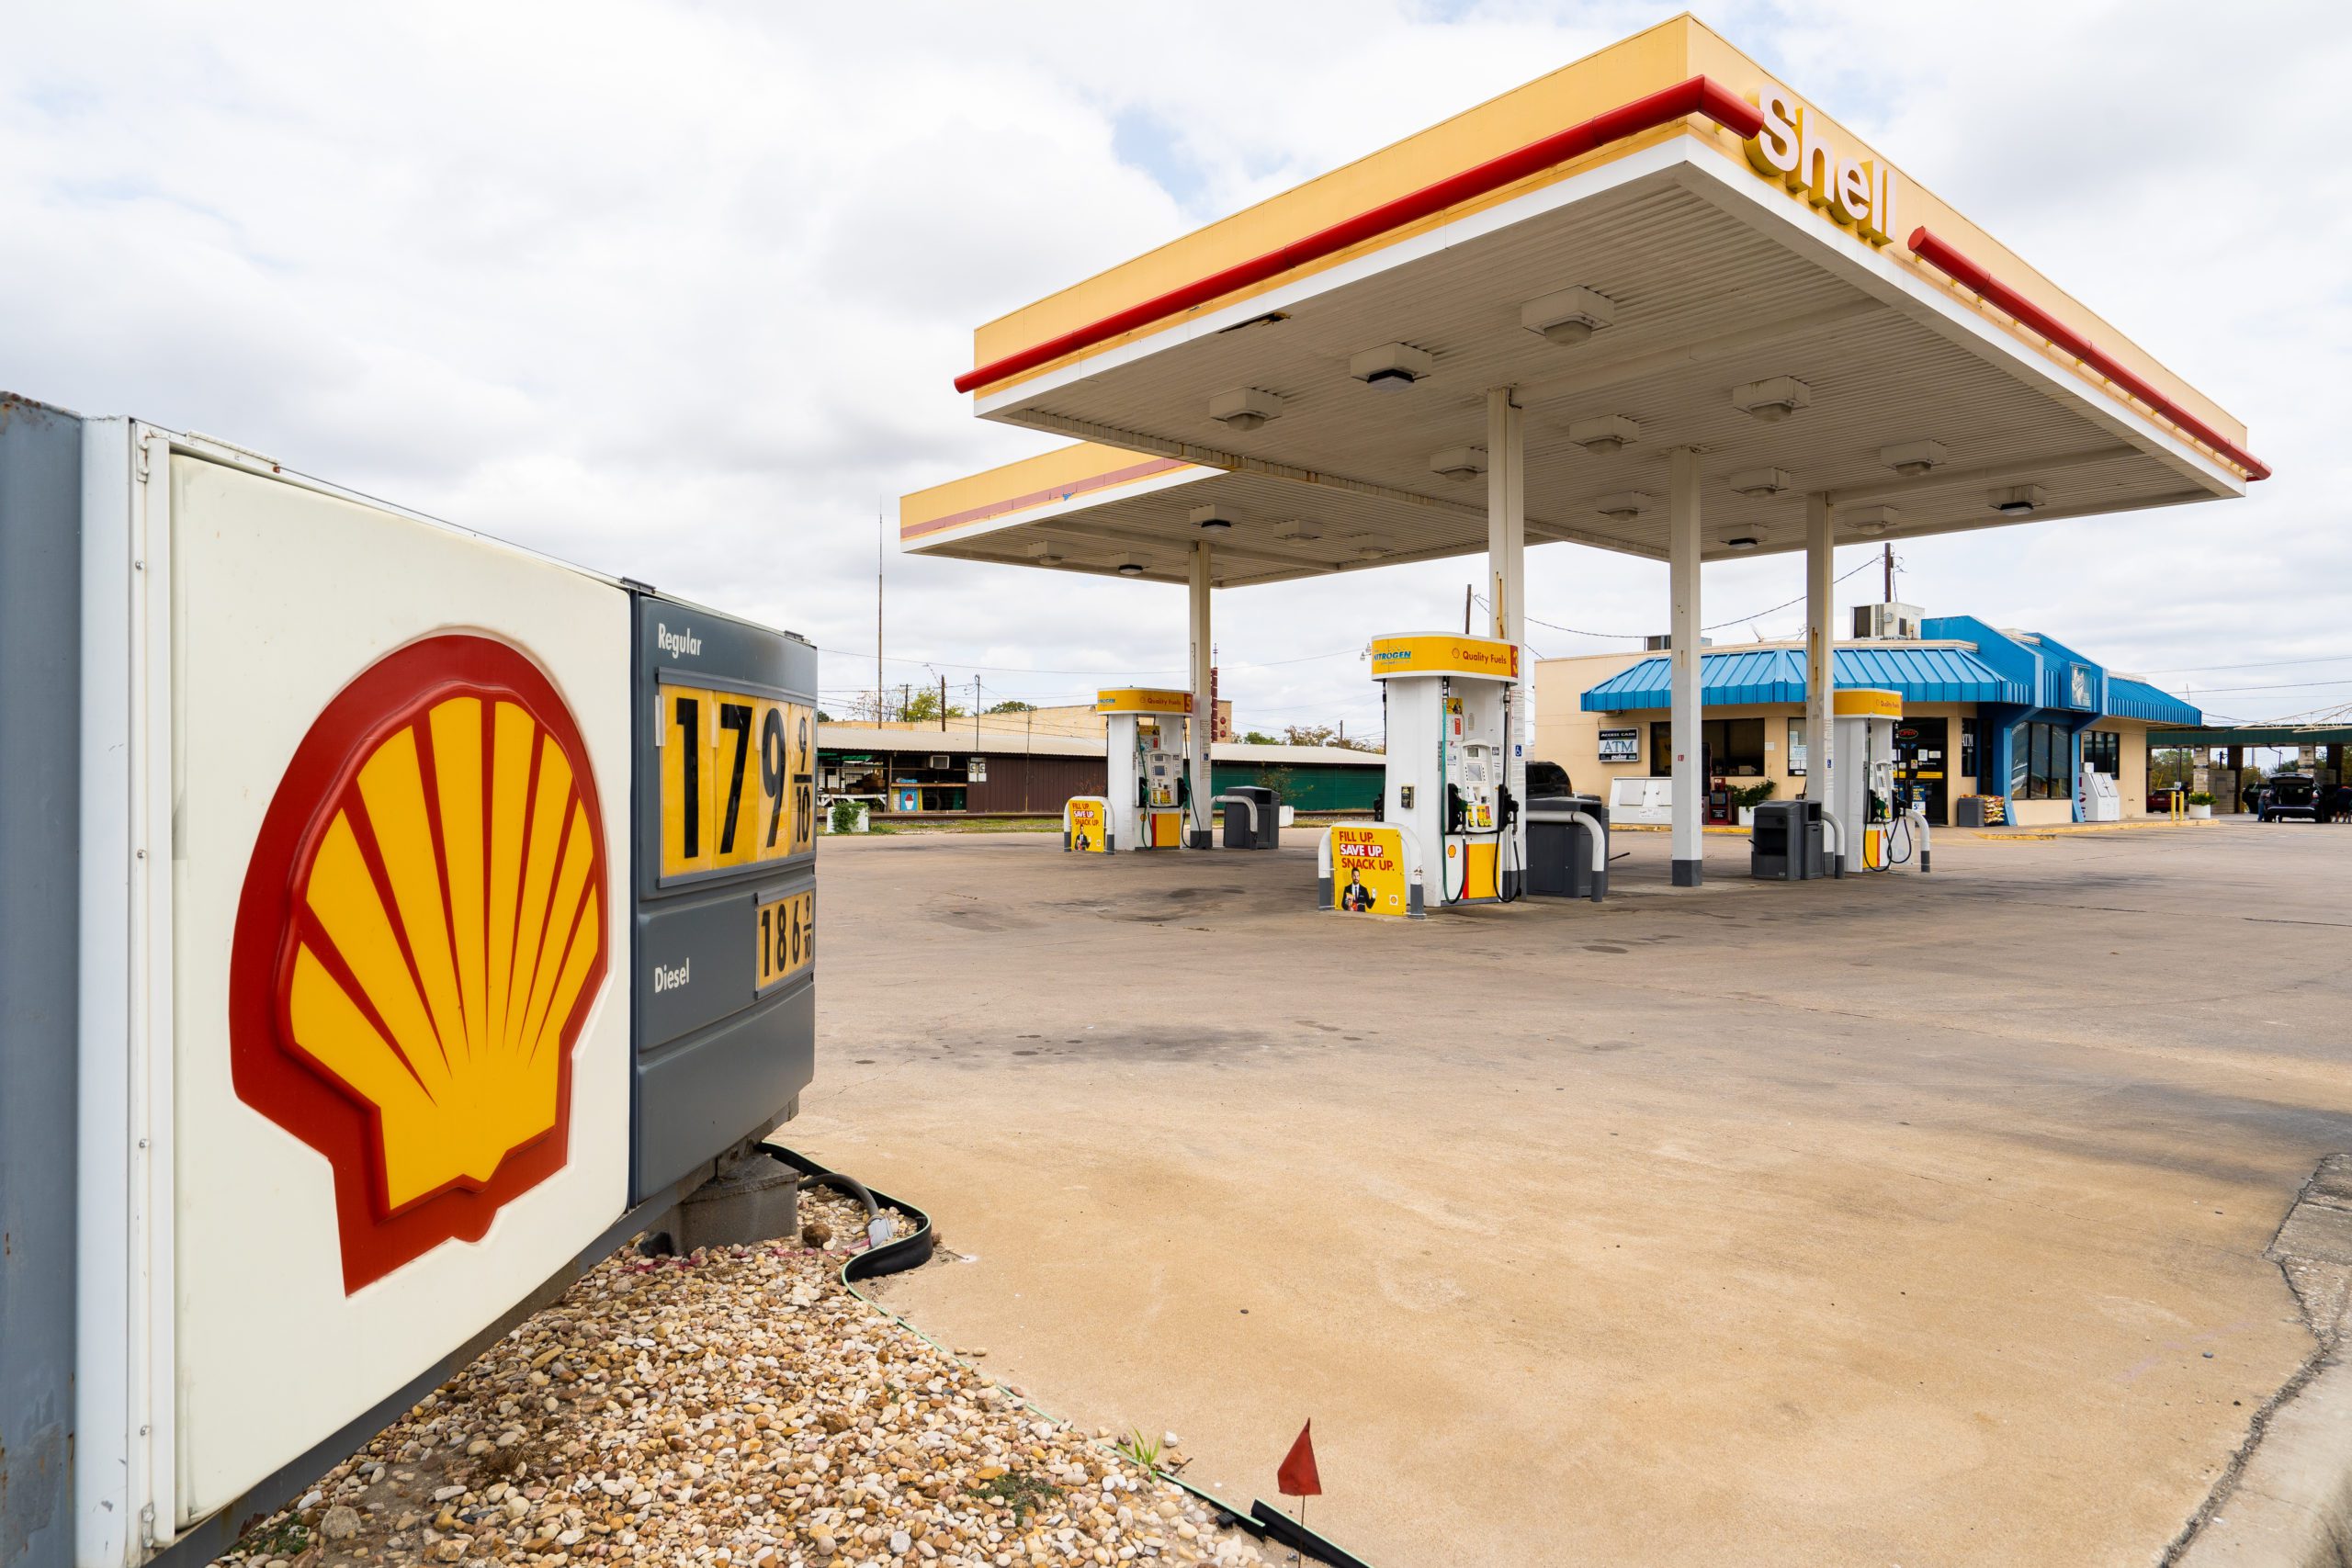 Exterior Photograph of Shell Pumps at Jud's Food Store in San Antonio, Texas